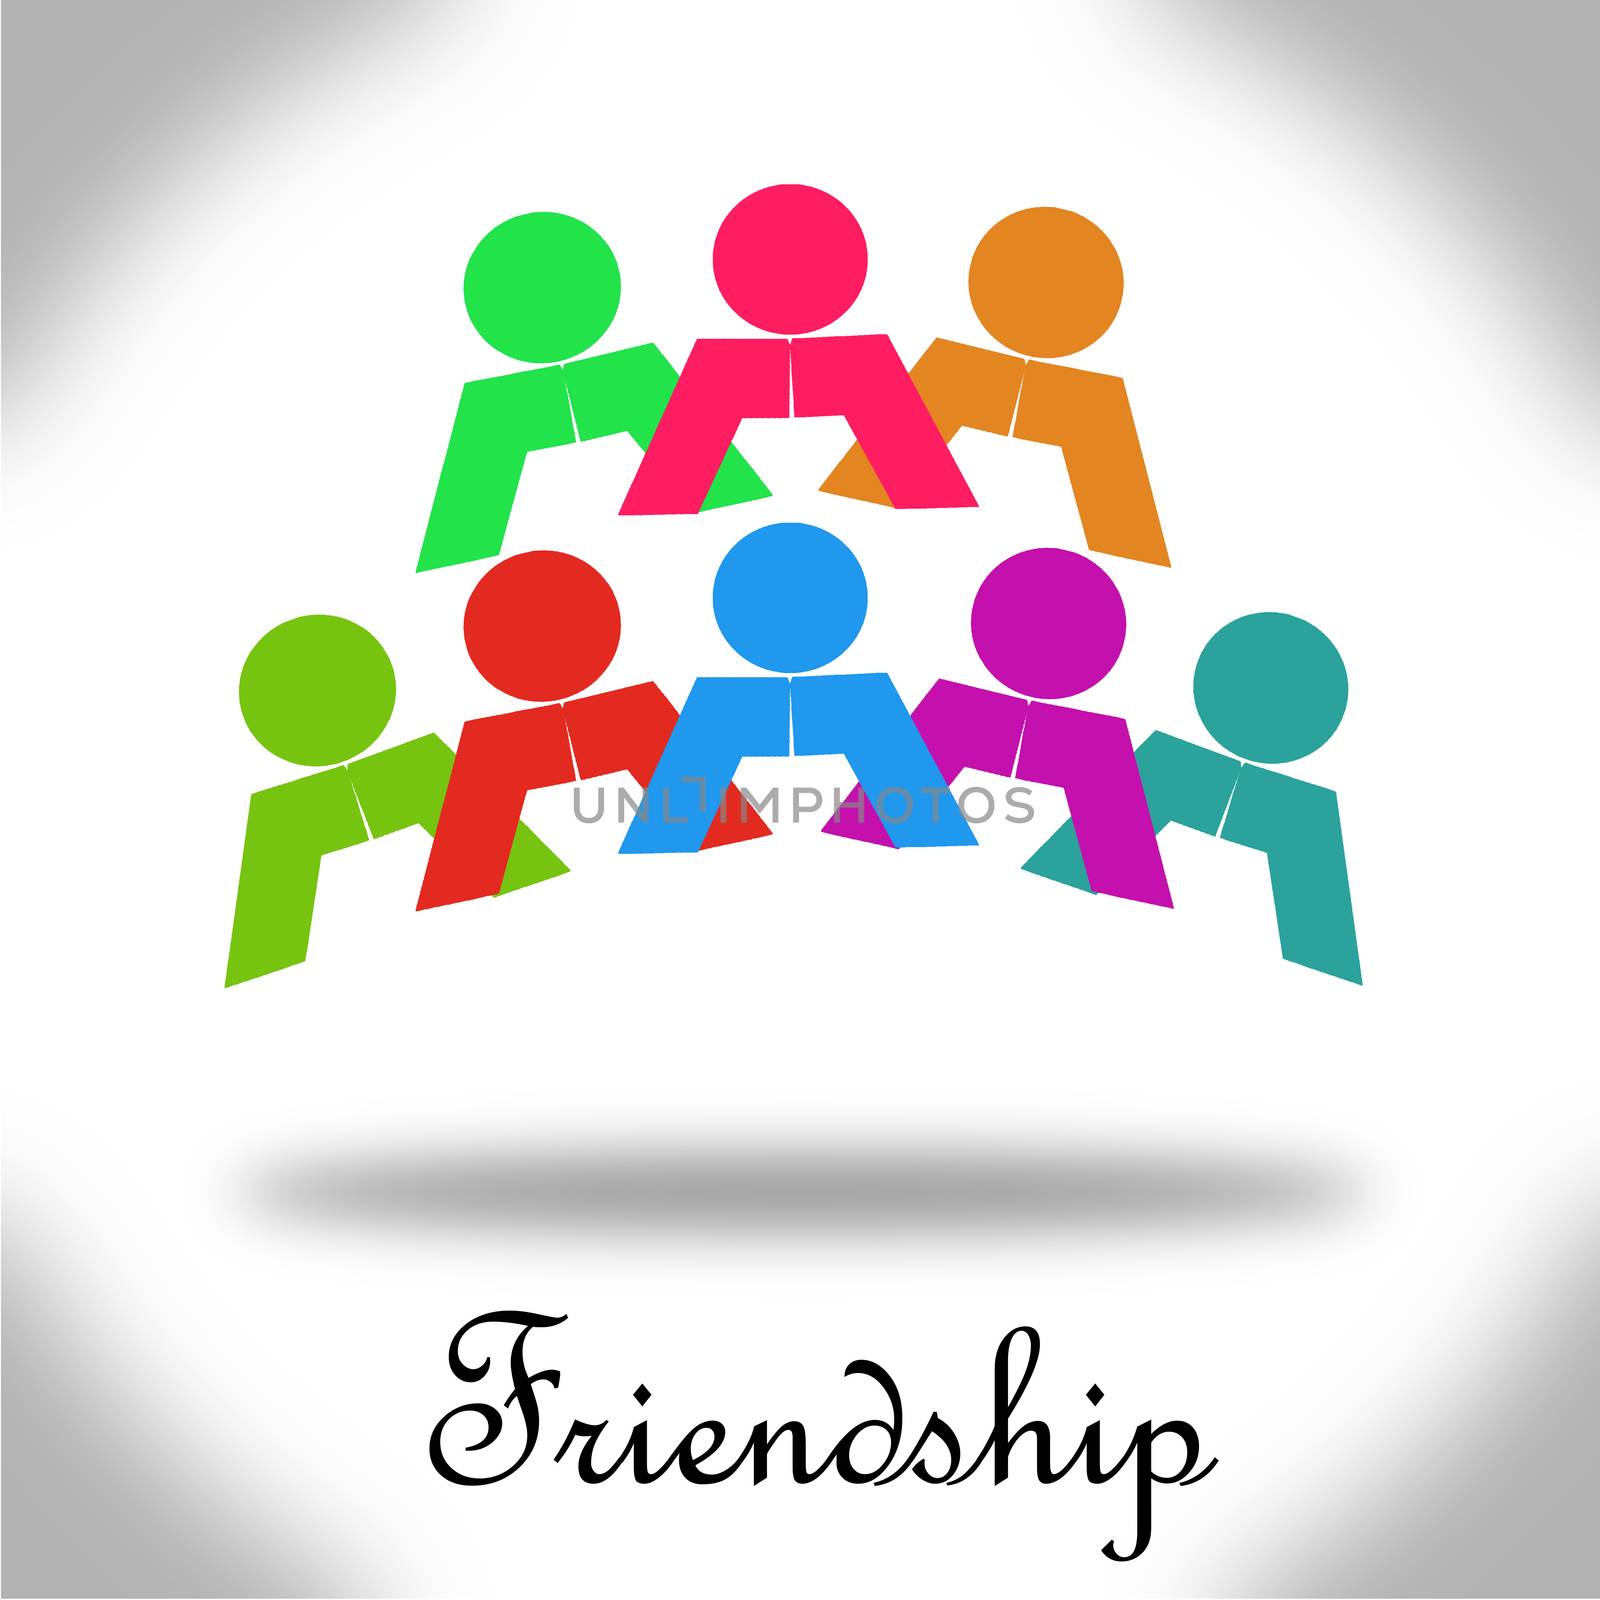 Friendship image with hi-res rendered artwork that could be used for any graphic design.